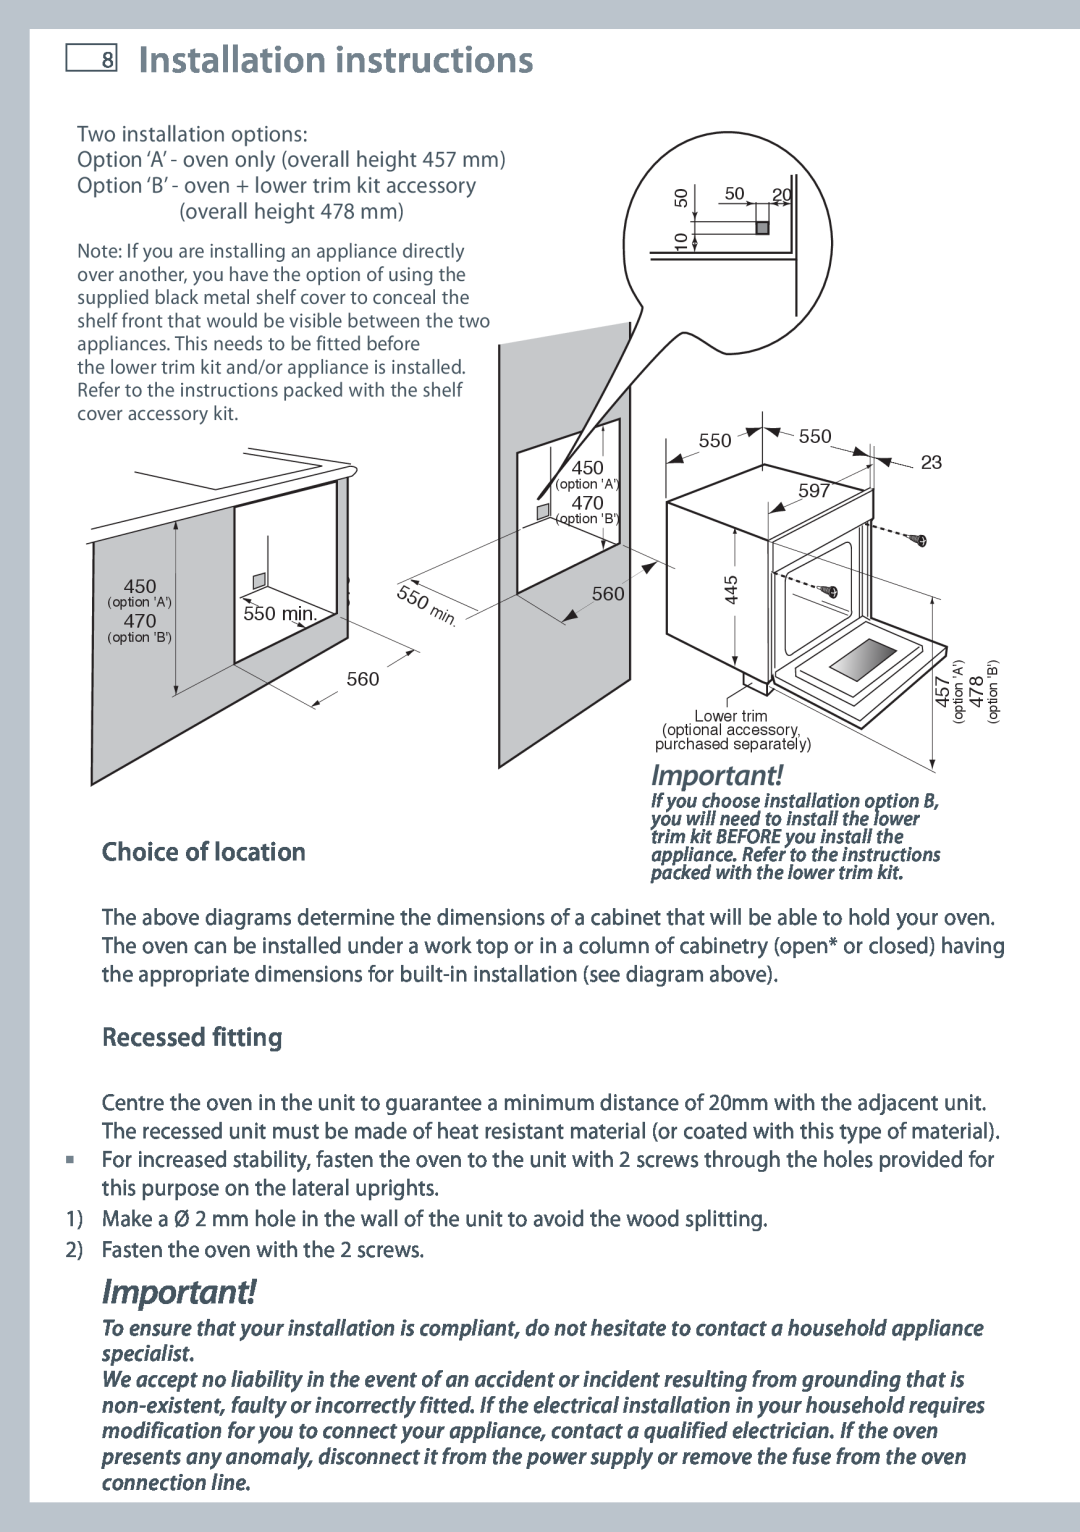 Fisher & Paykel OM36NDXB Installation instructions, Choice of location, Recessed fitting, Two installation options 